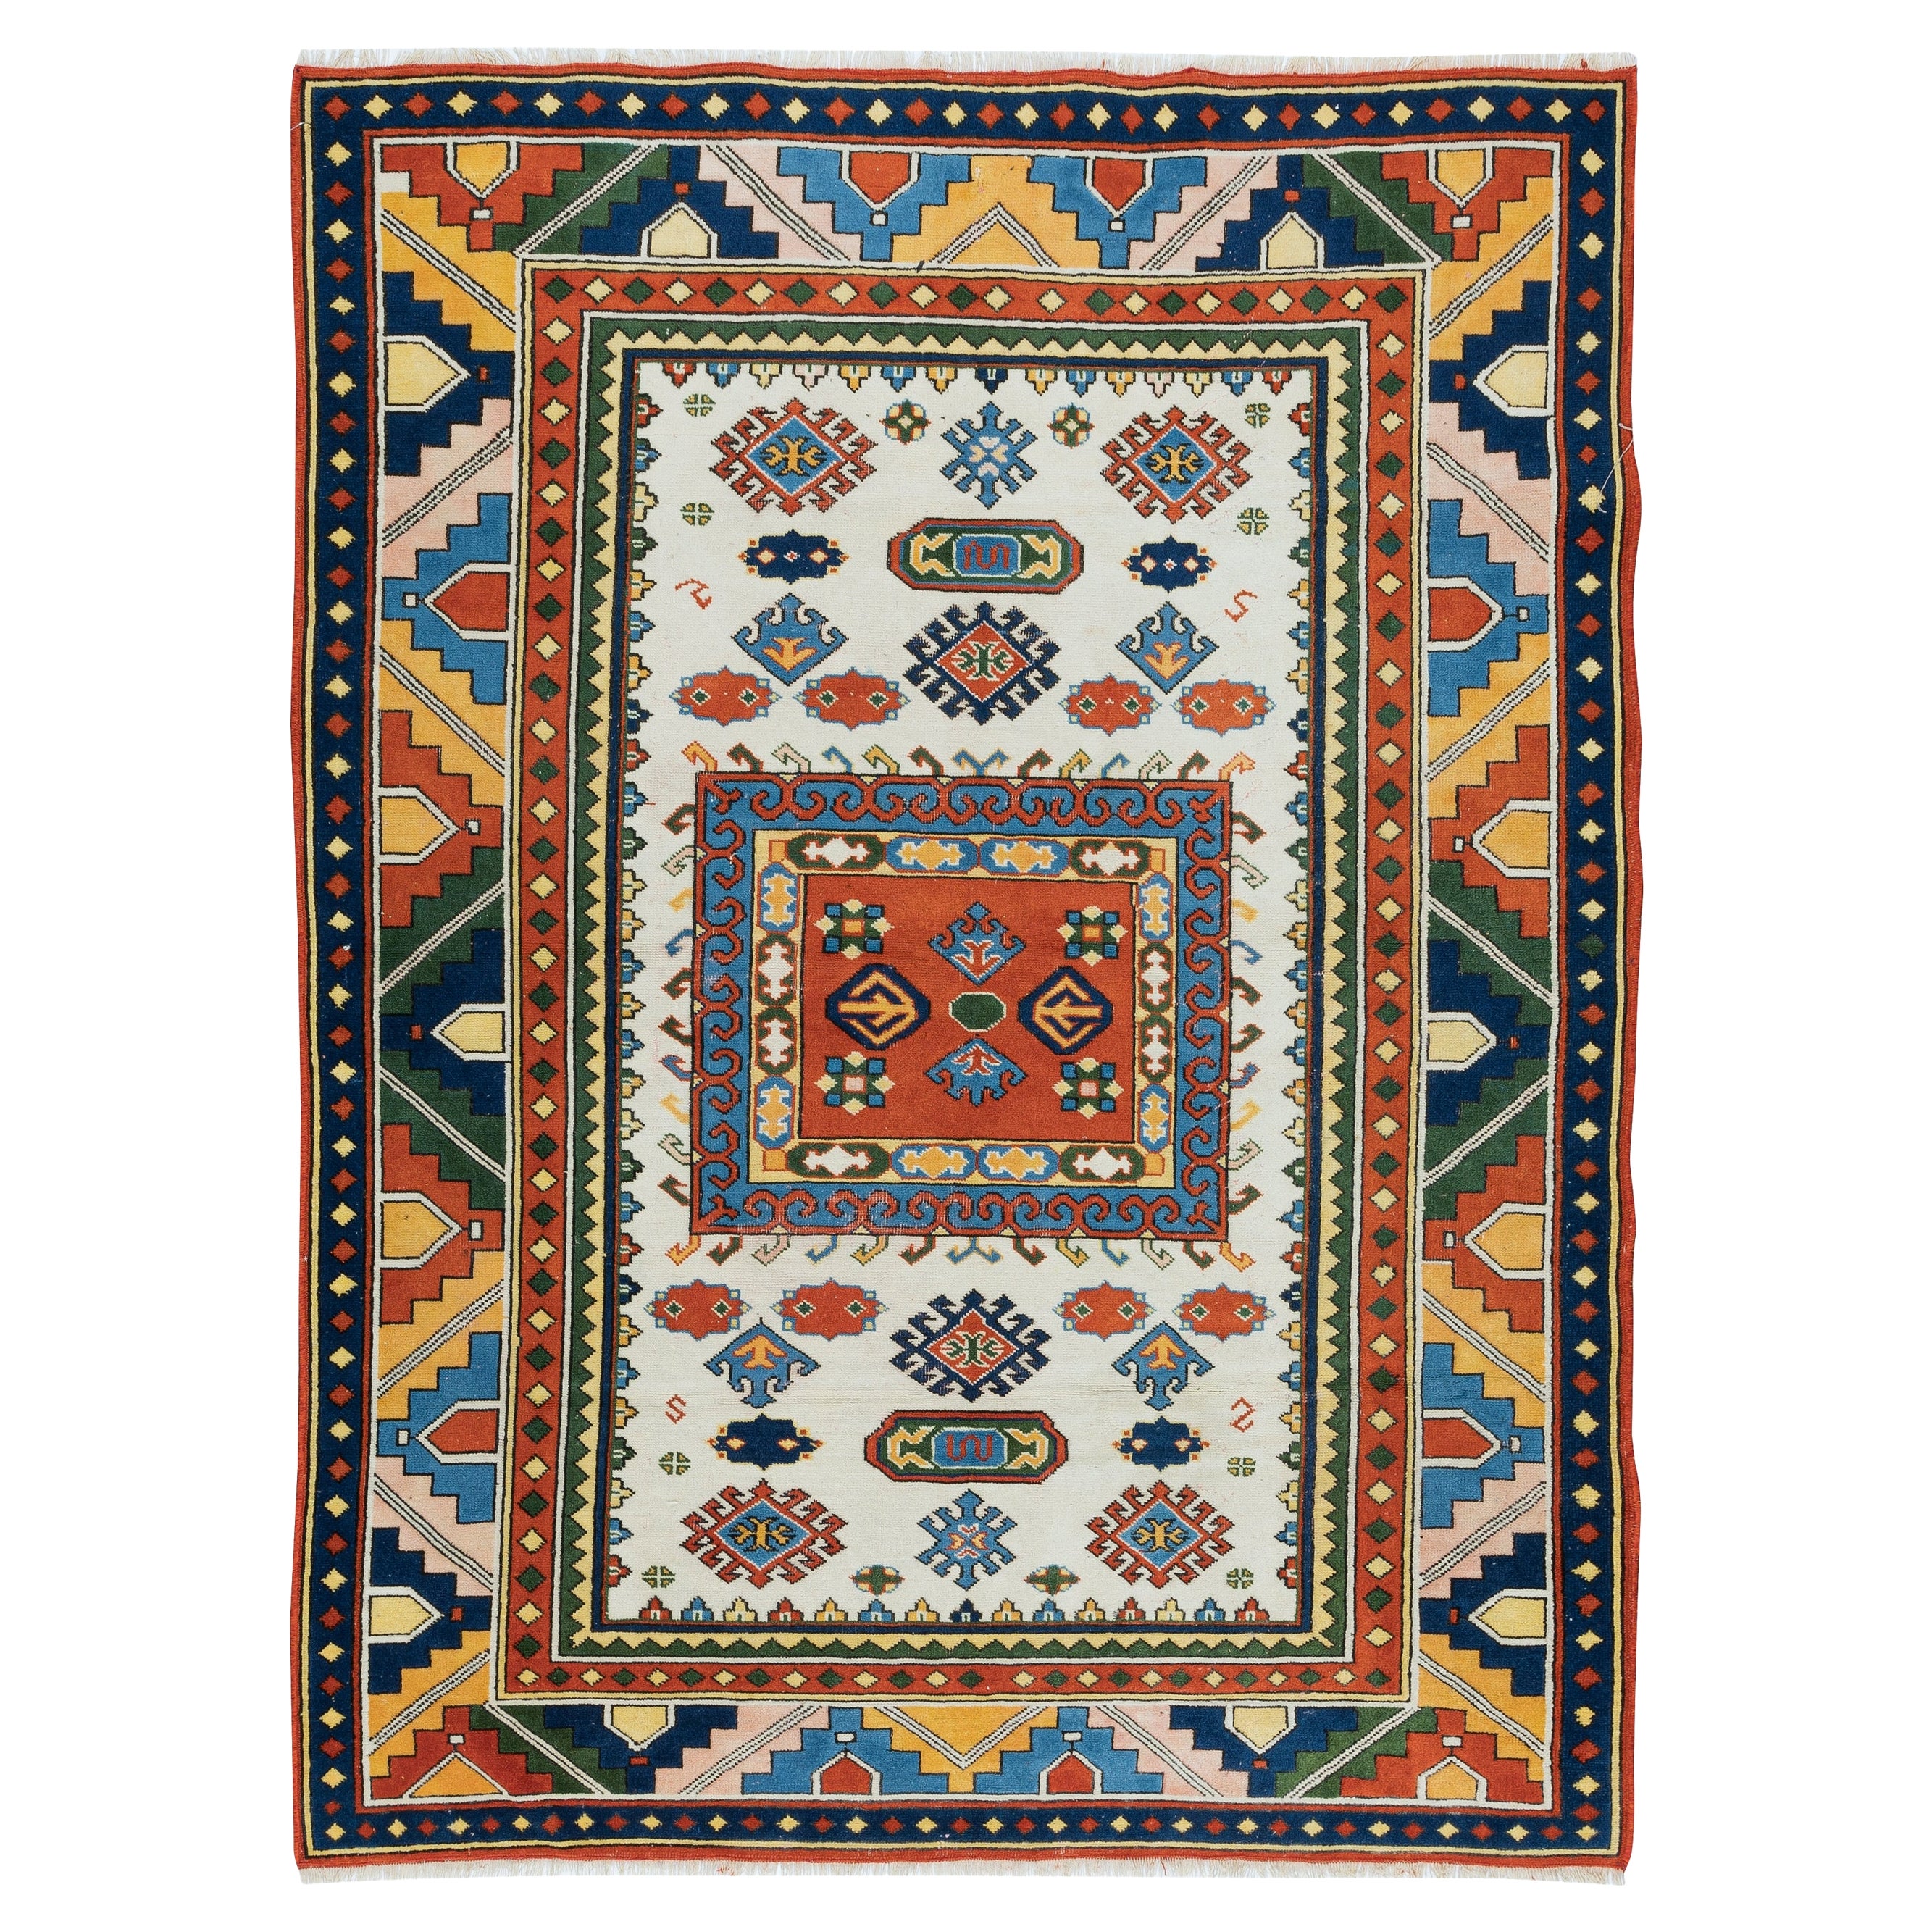 4x5.6 Ft Colorful Accent Rug, Vintage Turkish Carpet, Handmade Floor Covering For Sale